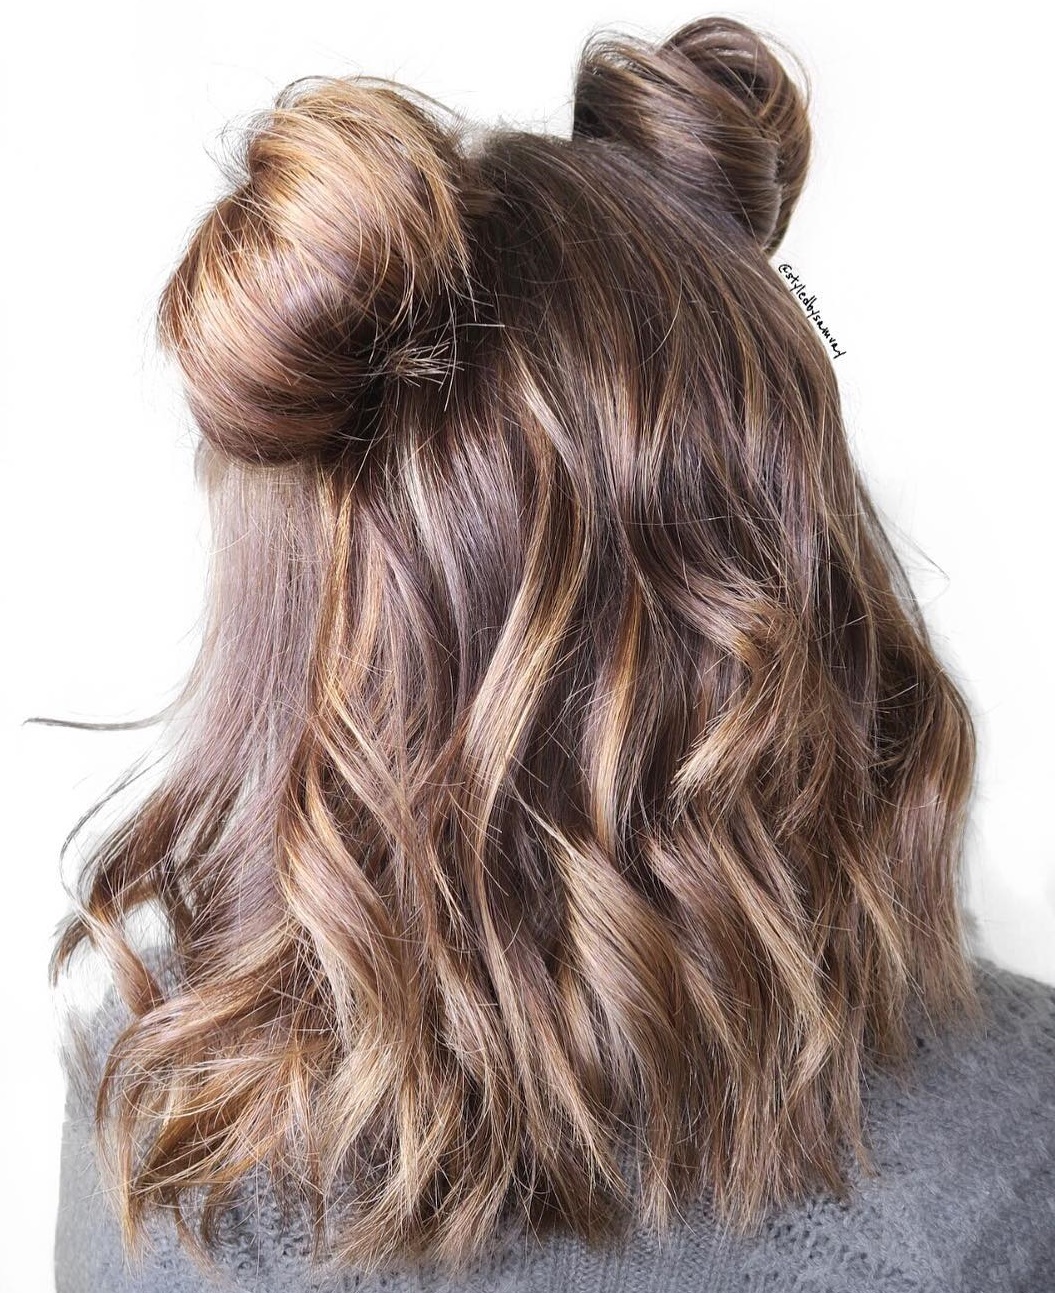 Half Up Half Down Hairstyle With Two Buns